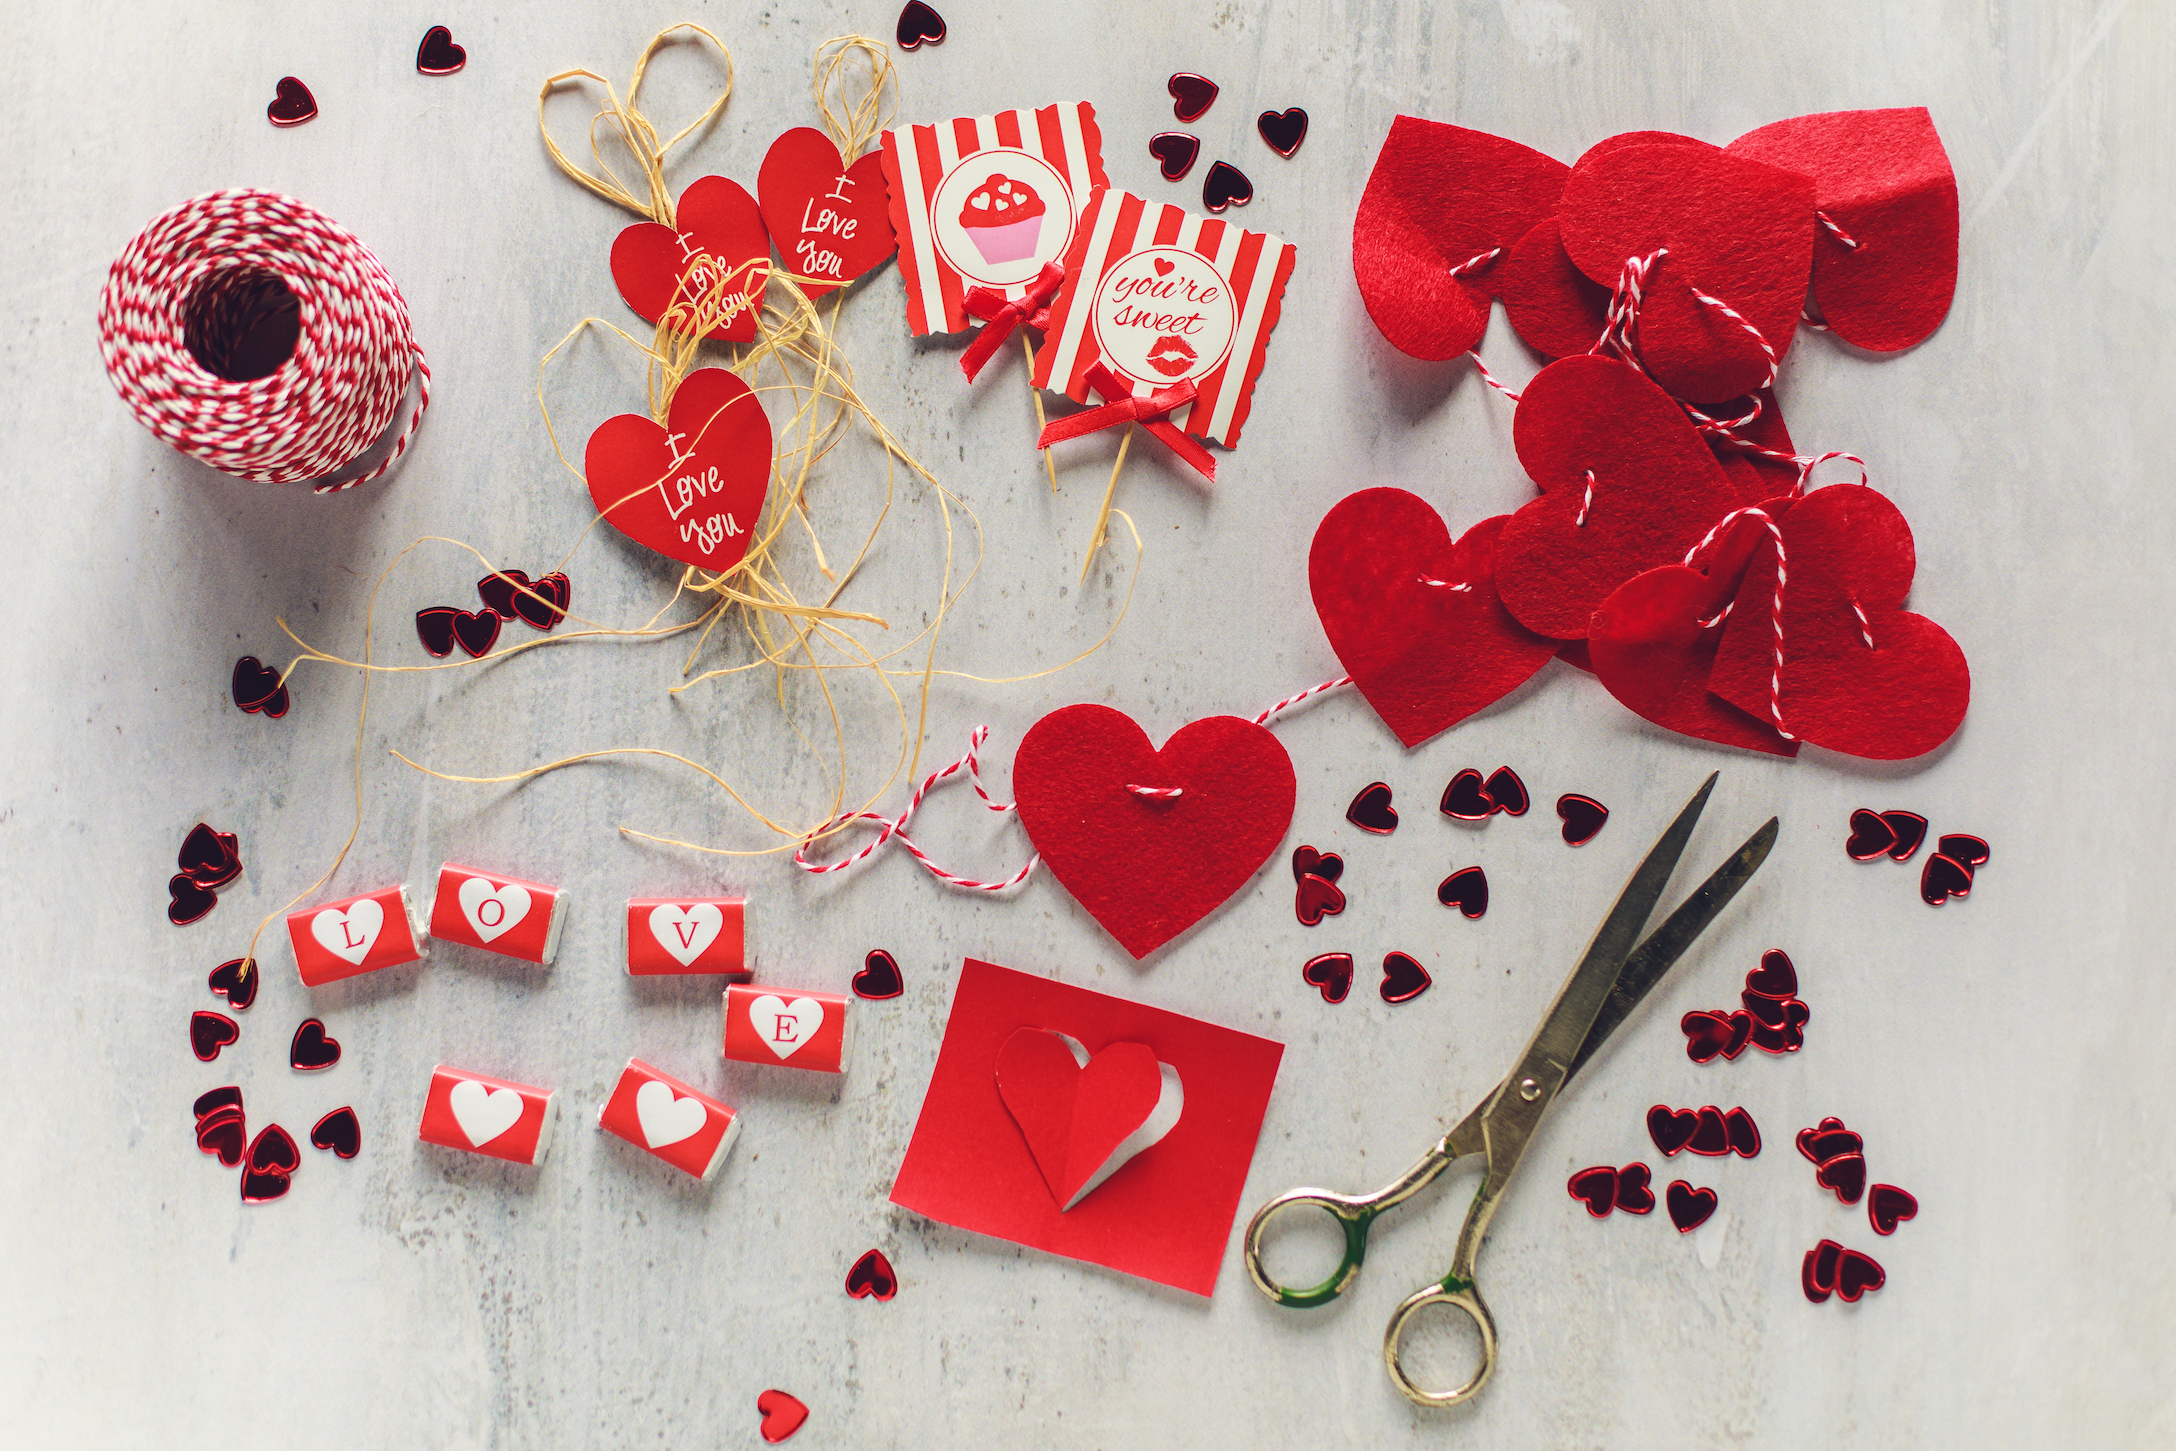 60 DIY Valentine's Day Gifts for Your Sweetheart: Shop Our Picks